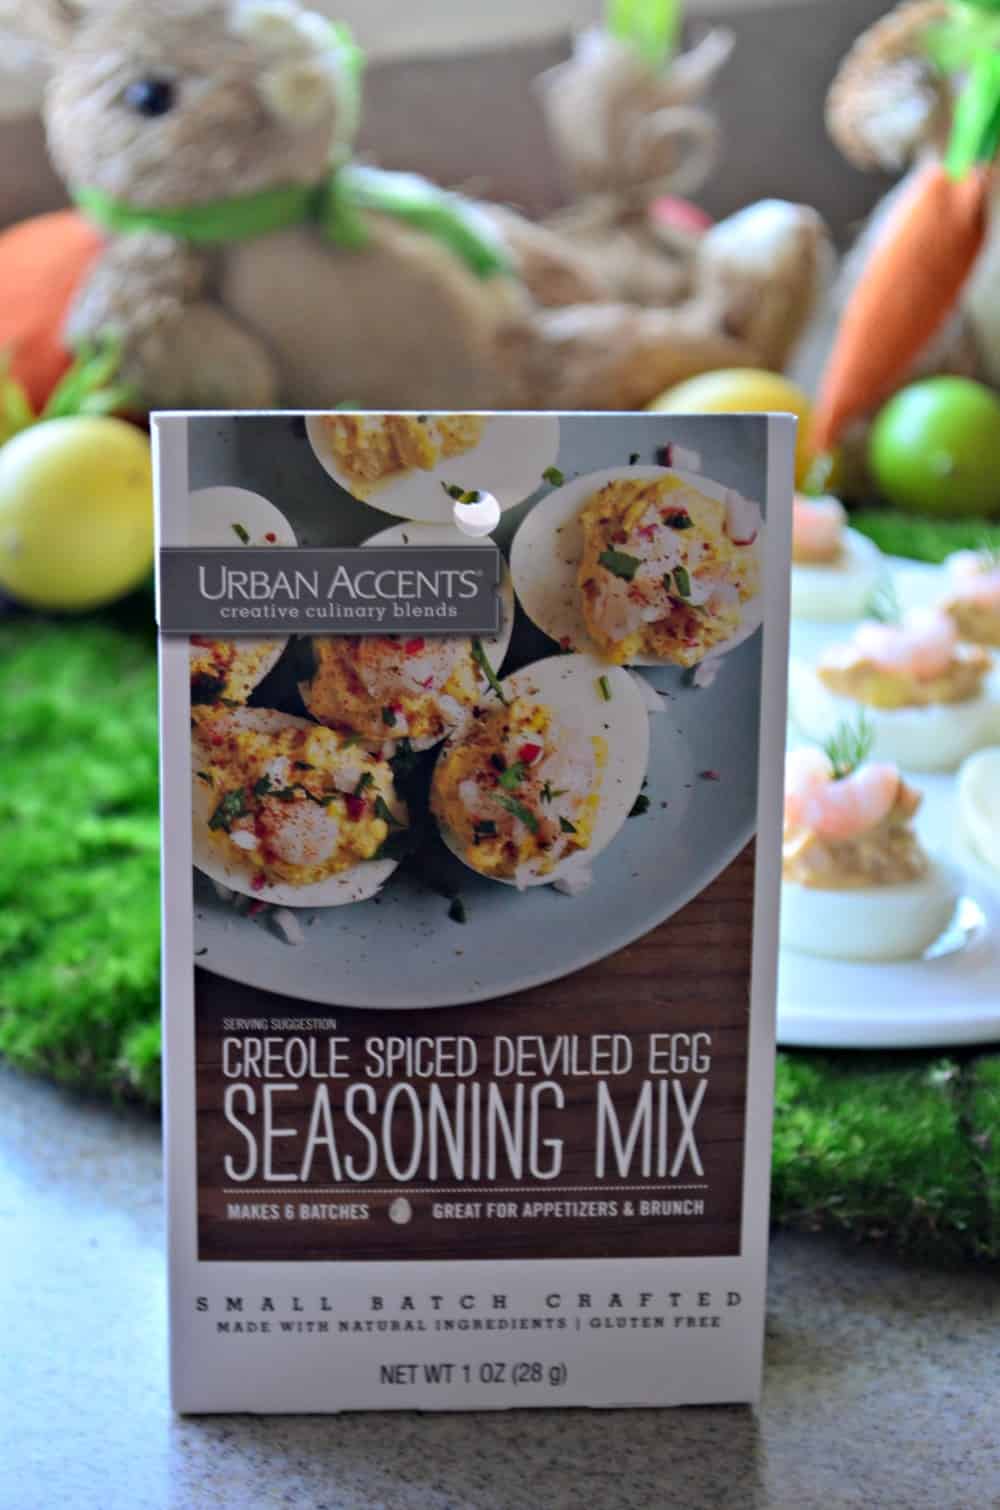 Creole Spiced Deviled Egg Seasoning Mix